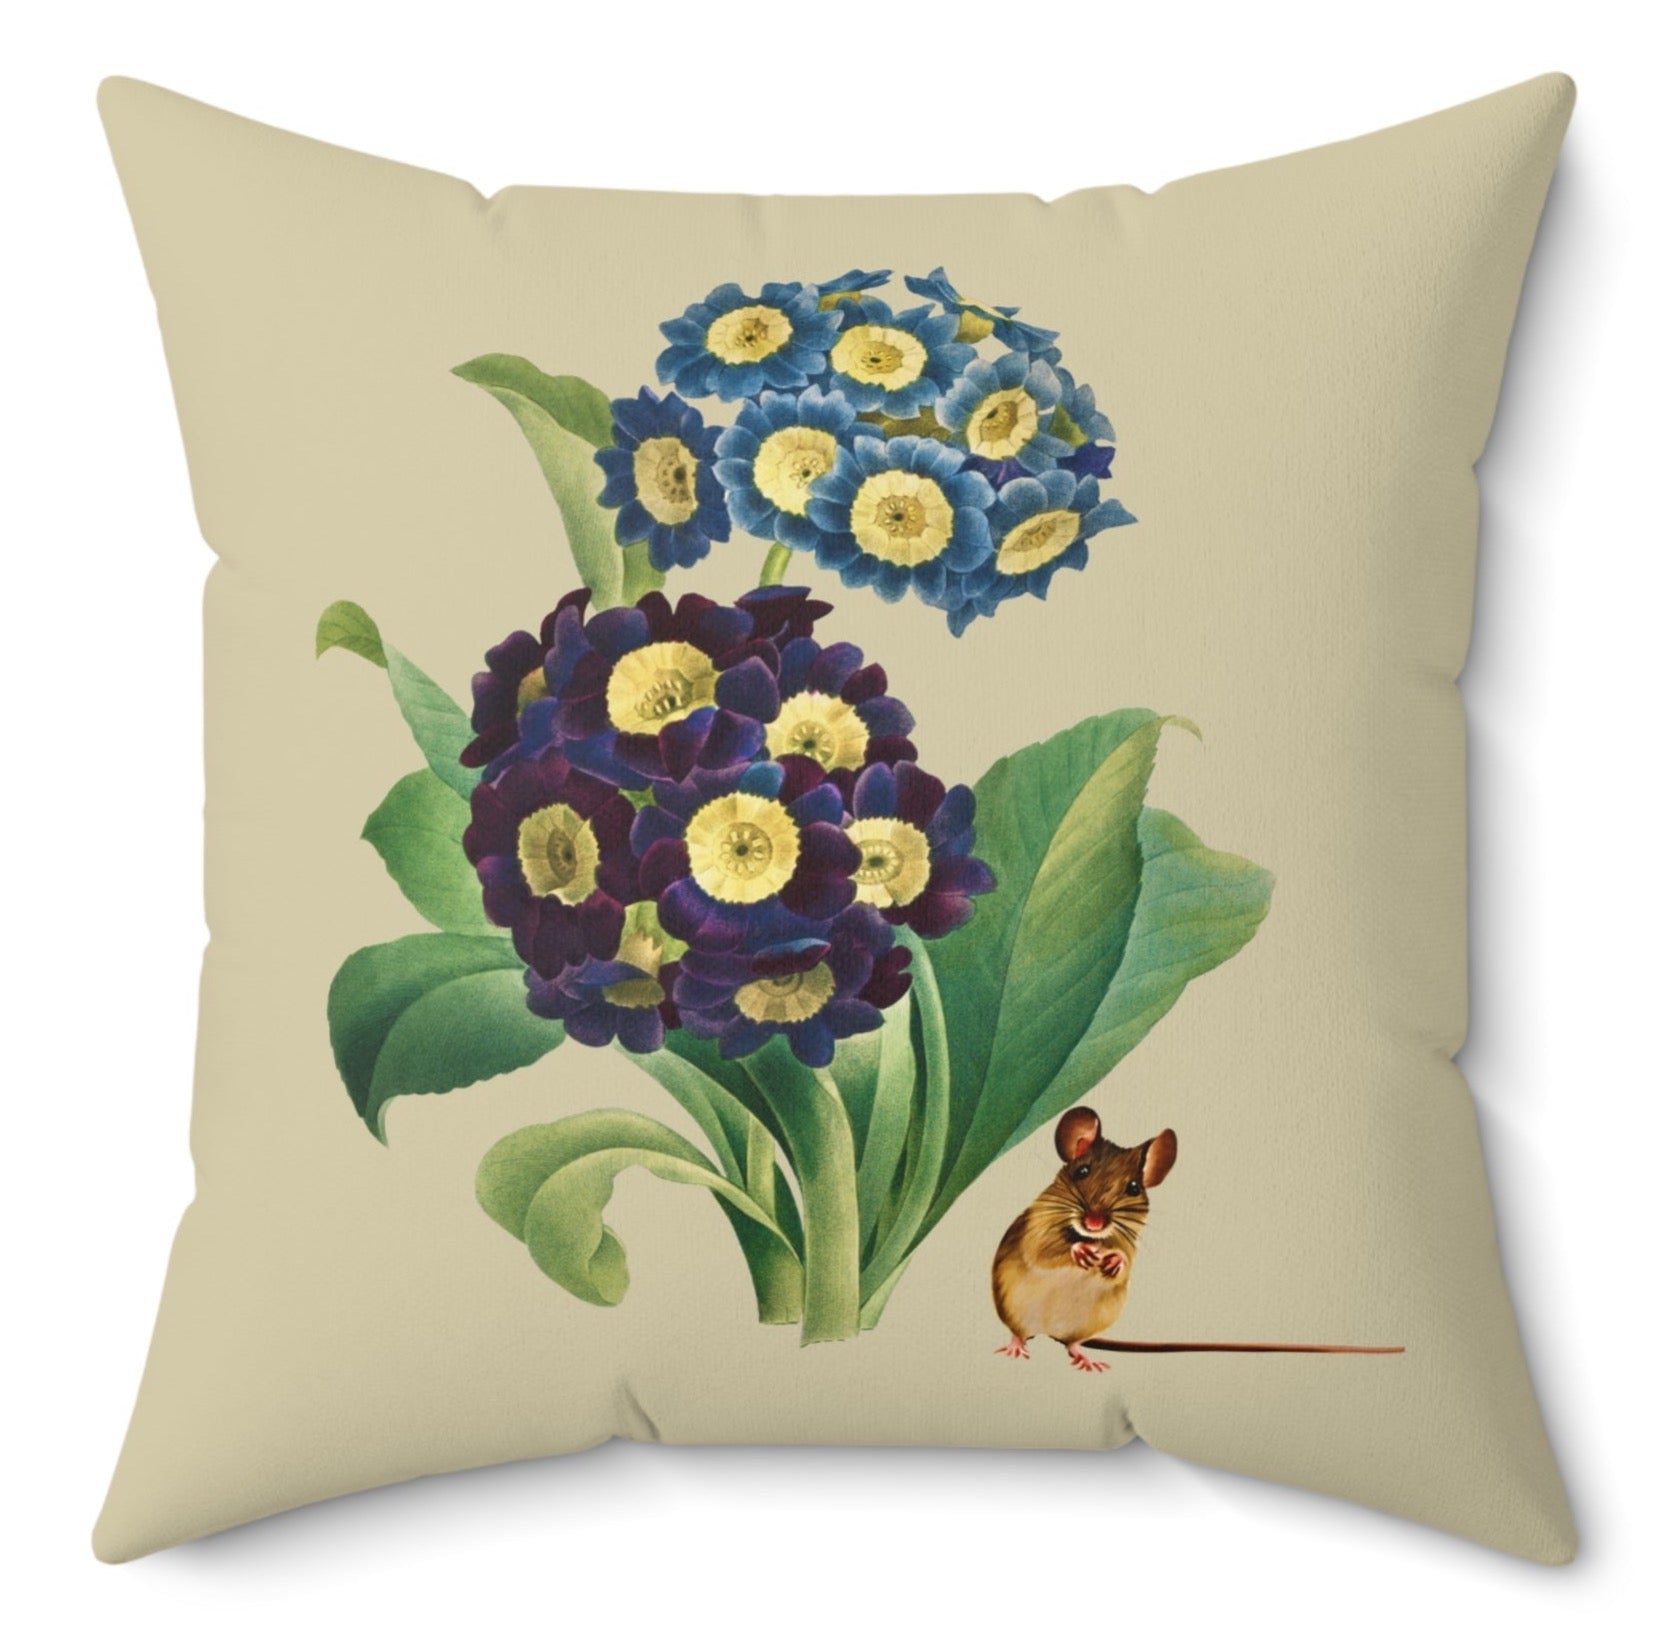 Primula and Mouse Vintage Throw Pillow Polyester Square Cover